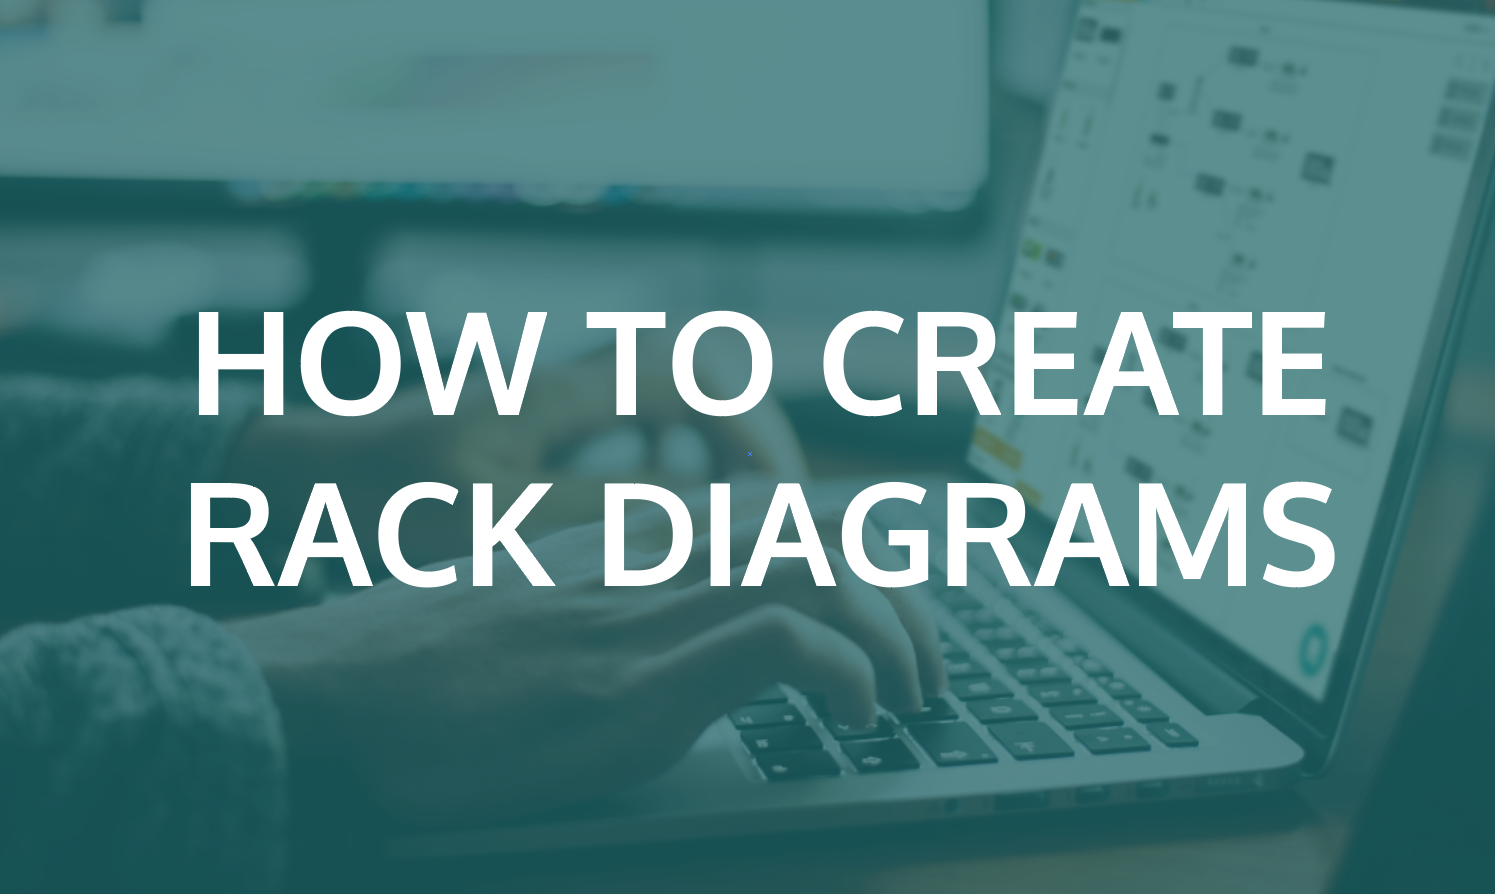 How To Create Rack Diagrams